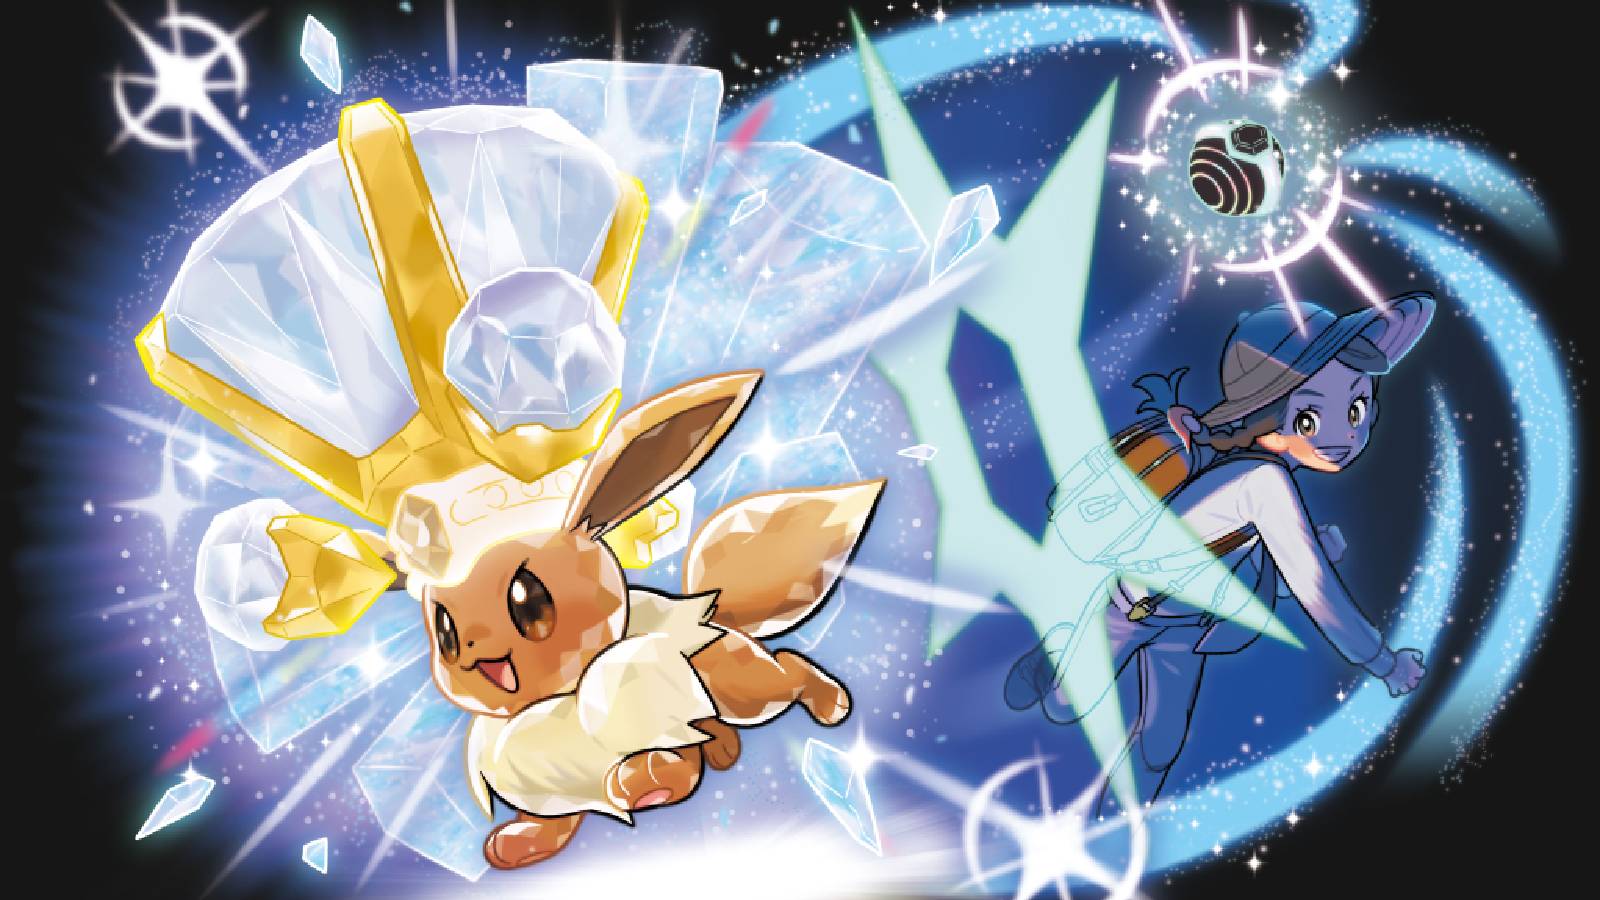 Pokemon Scarlet & Violet key art shows a Trainer using an Eevee in a Tera Raid